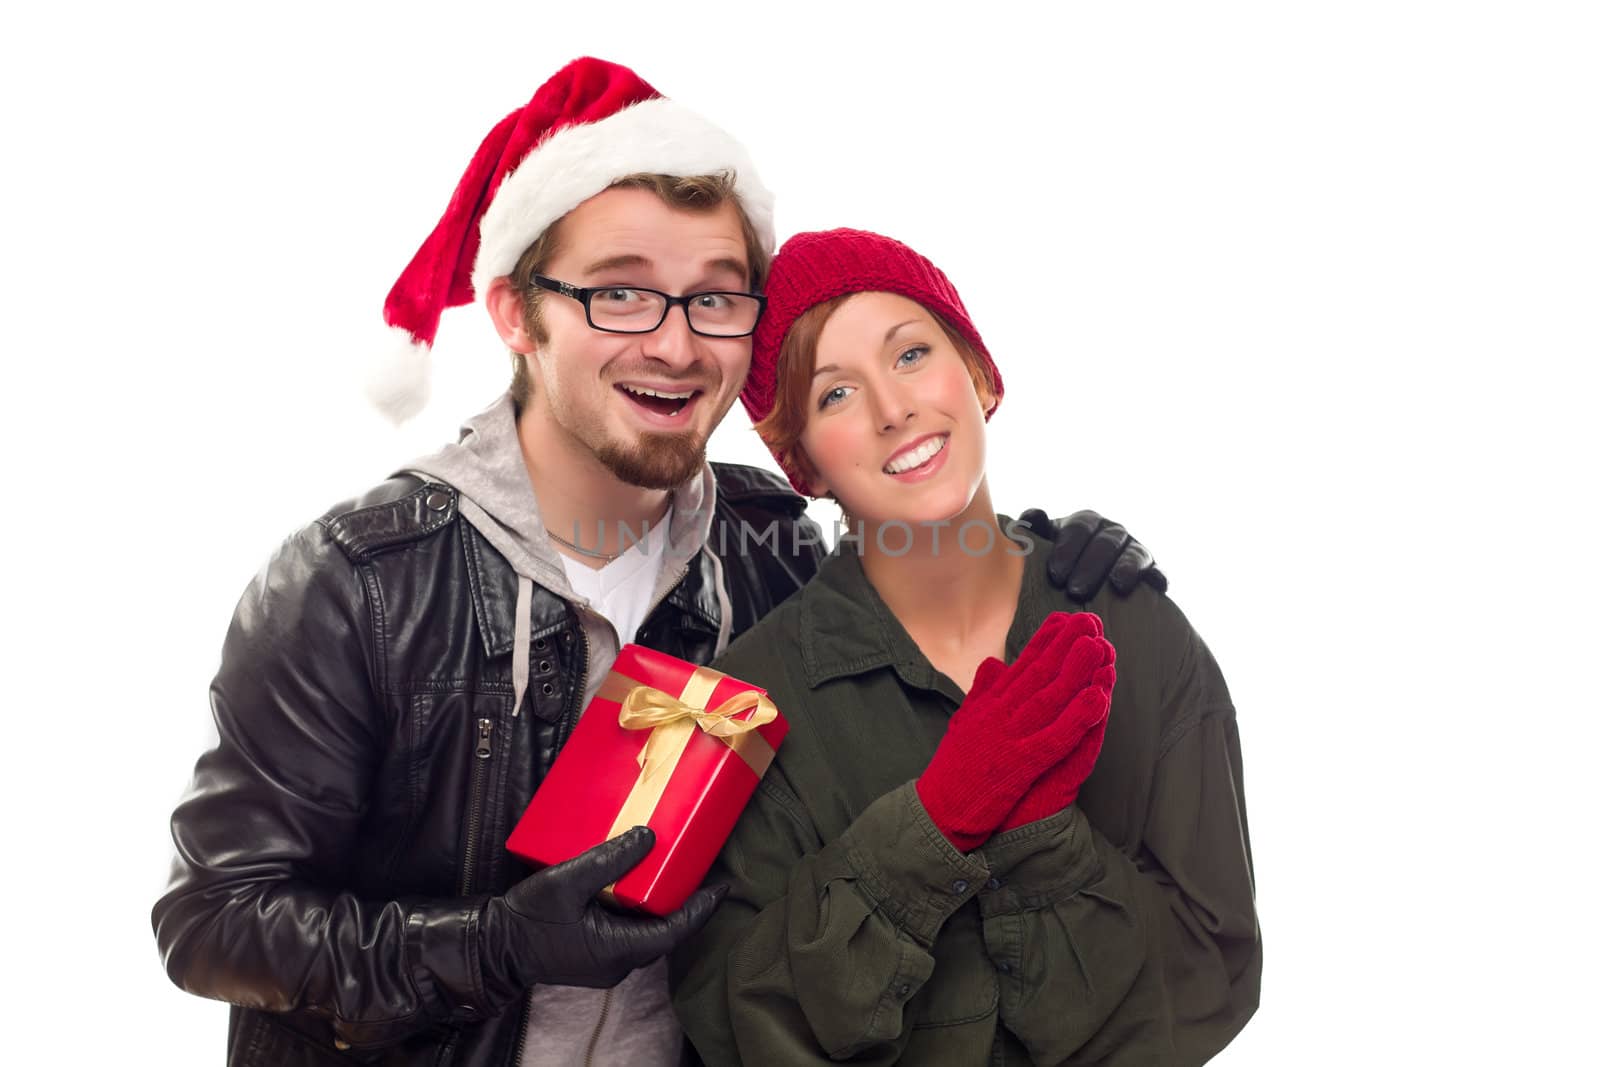 Warm Attractive Young Couple with Holiday Gift Isolated on a White Background.